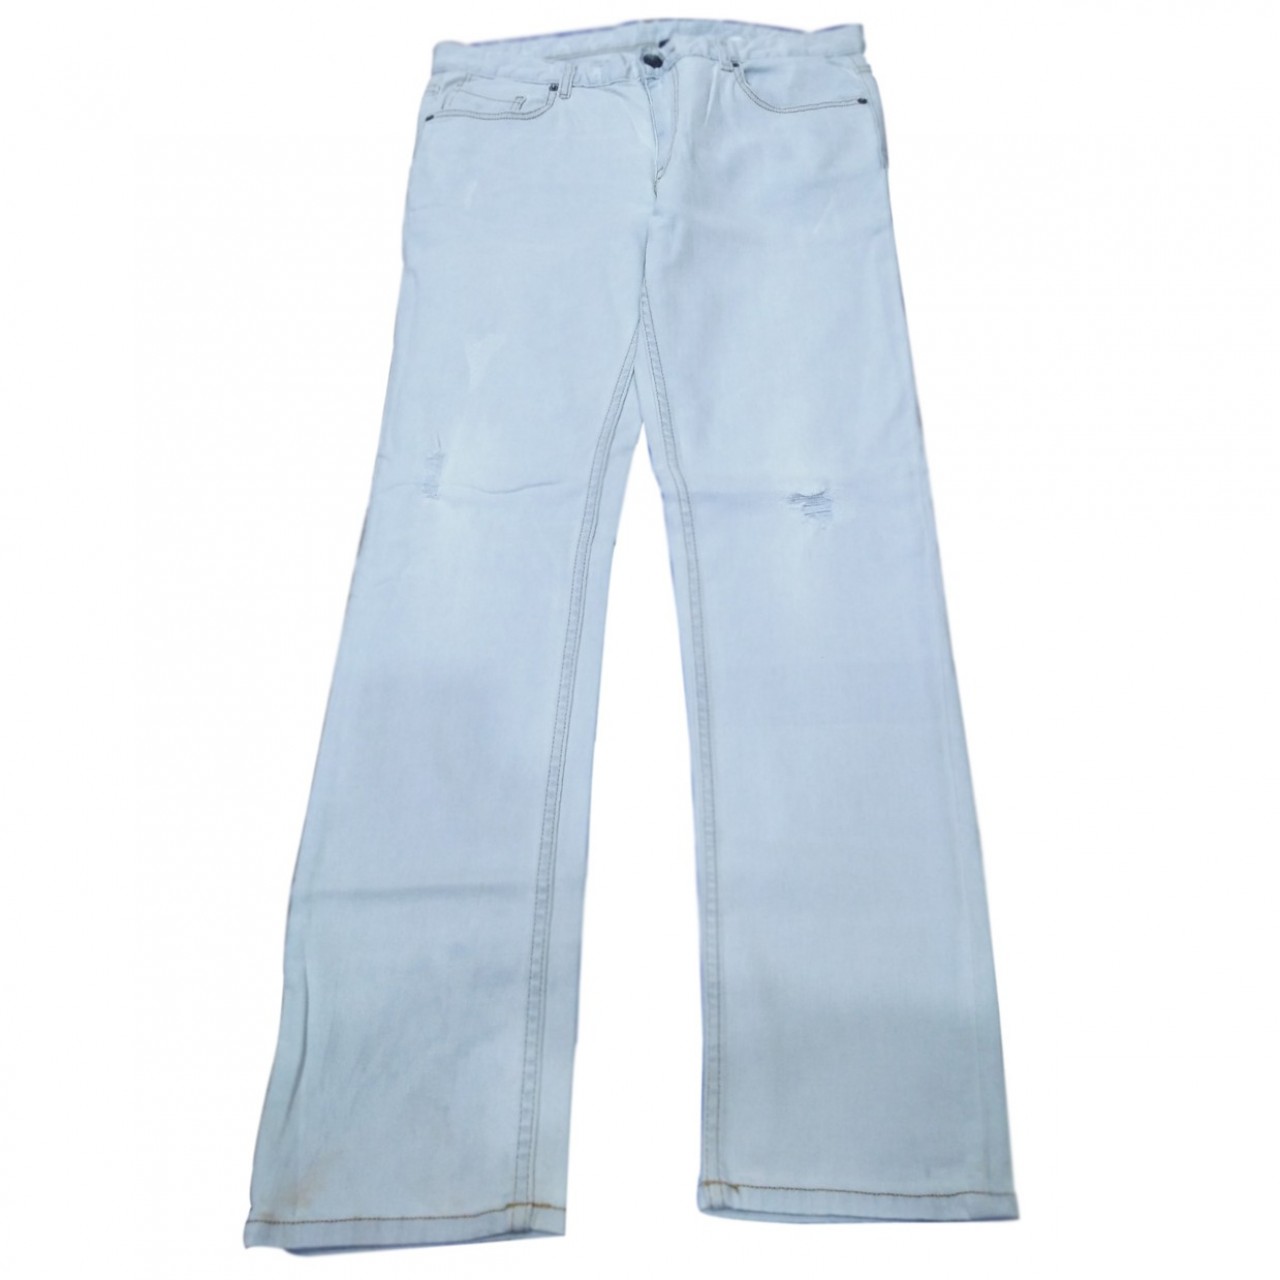 Relaxed Fit Striped Jeans Pant For Men - White - 28” to 40”